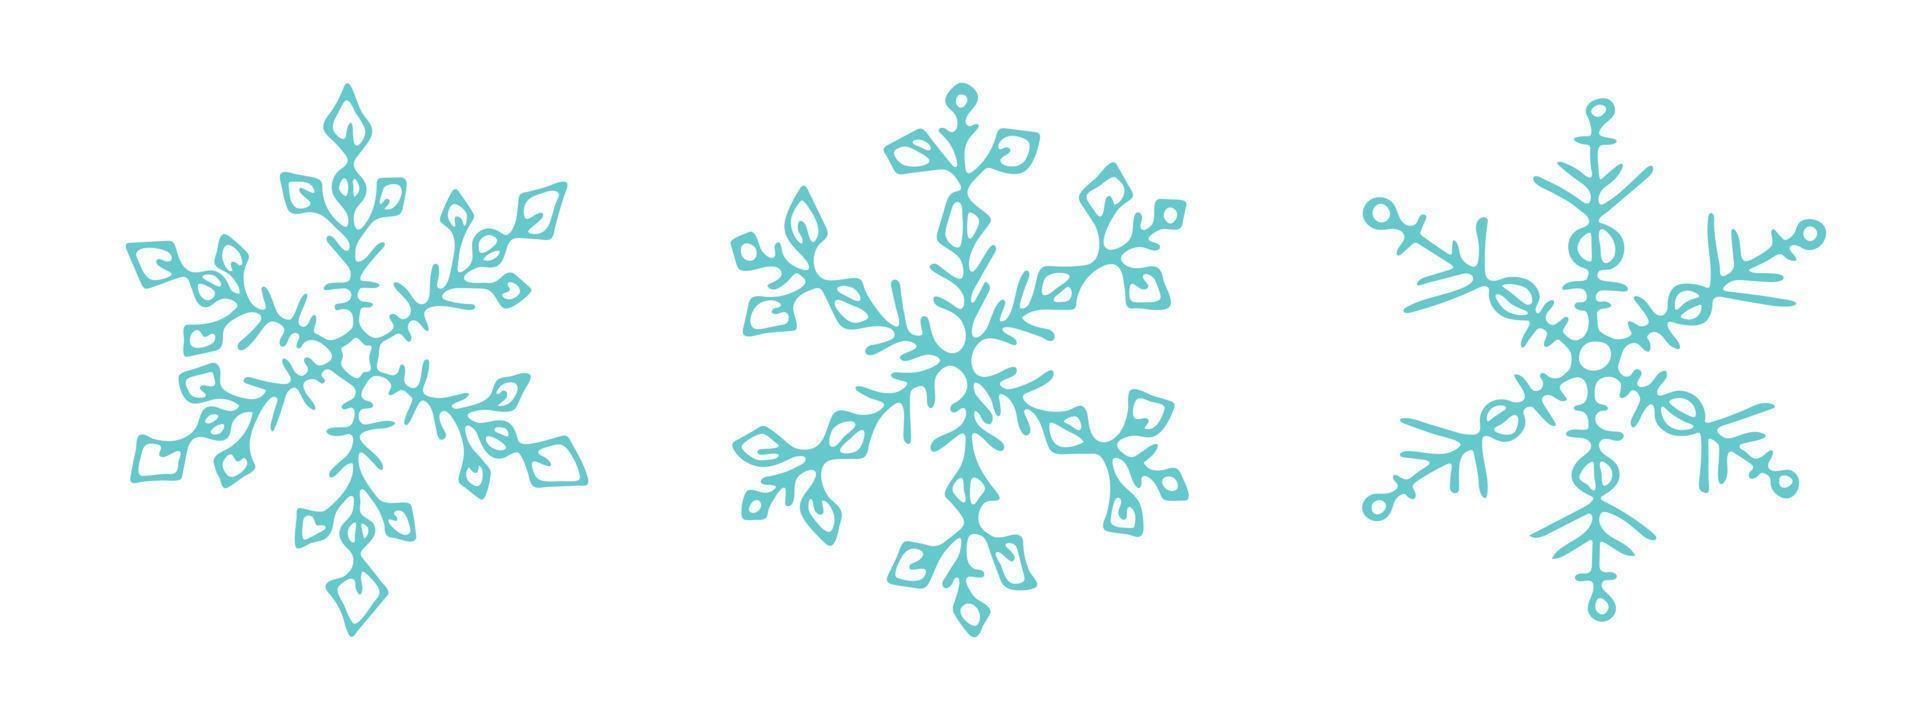 Set of cute hand drawn snowflakes. Vector doodle illustration. Christmas and New Year modern design. For print, web, design, decoration, logo.